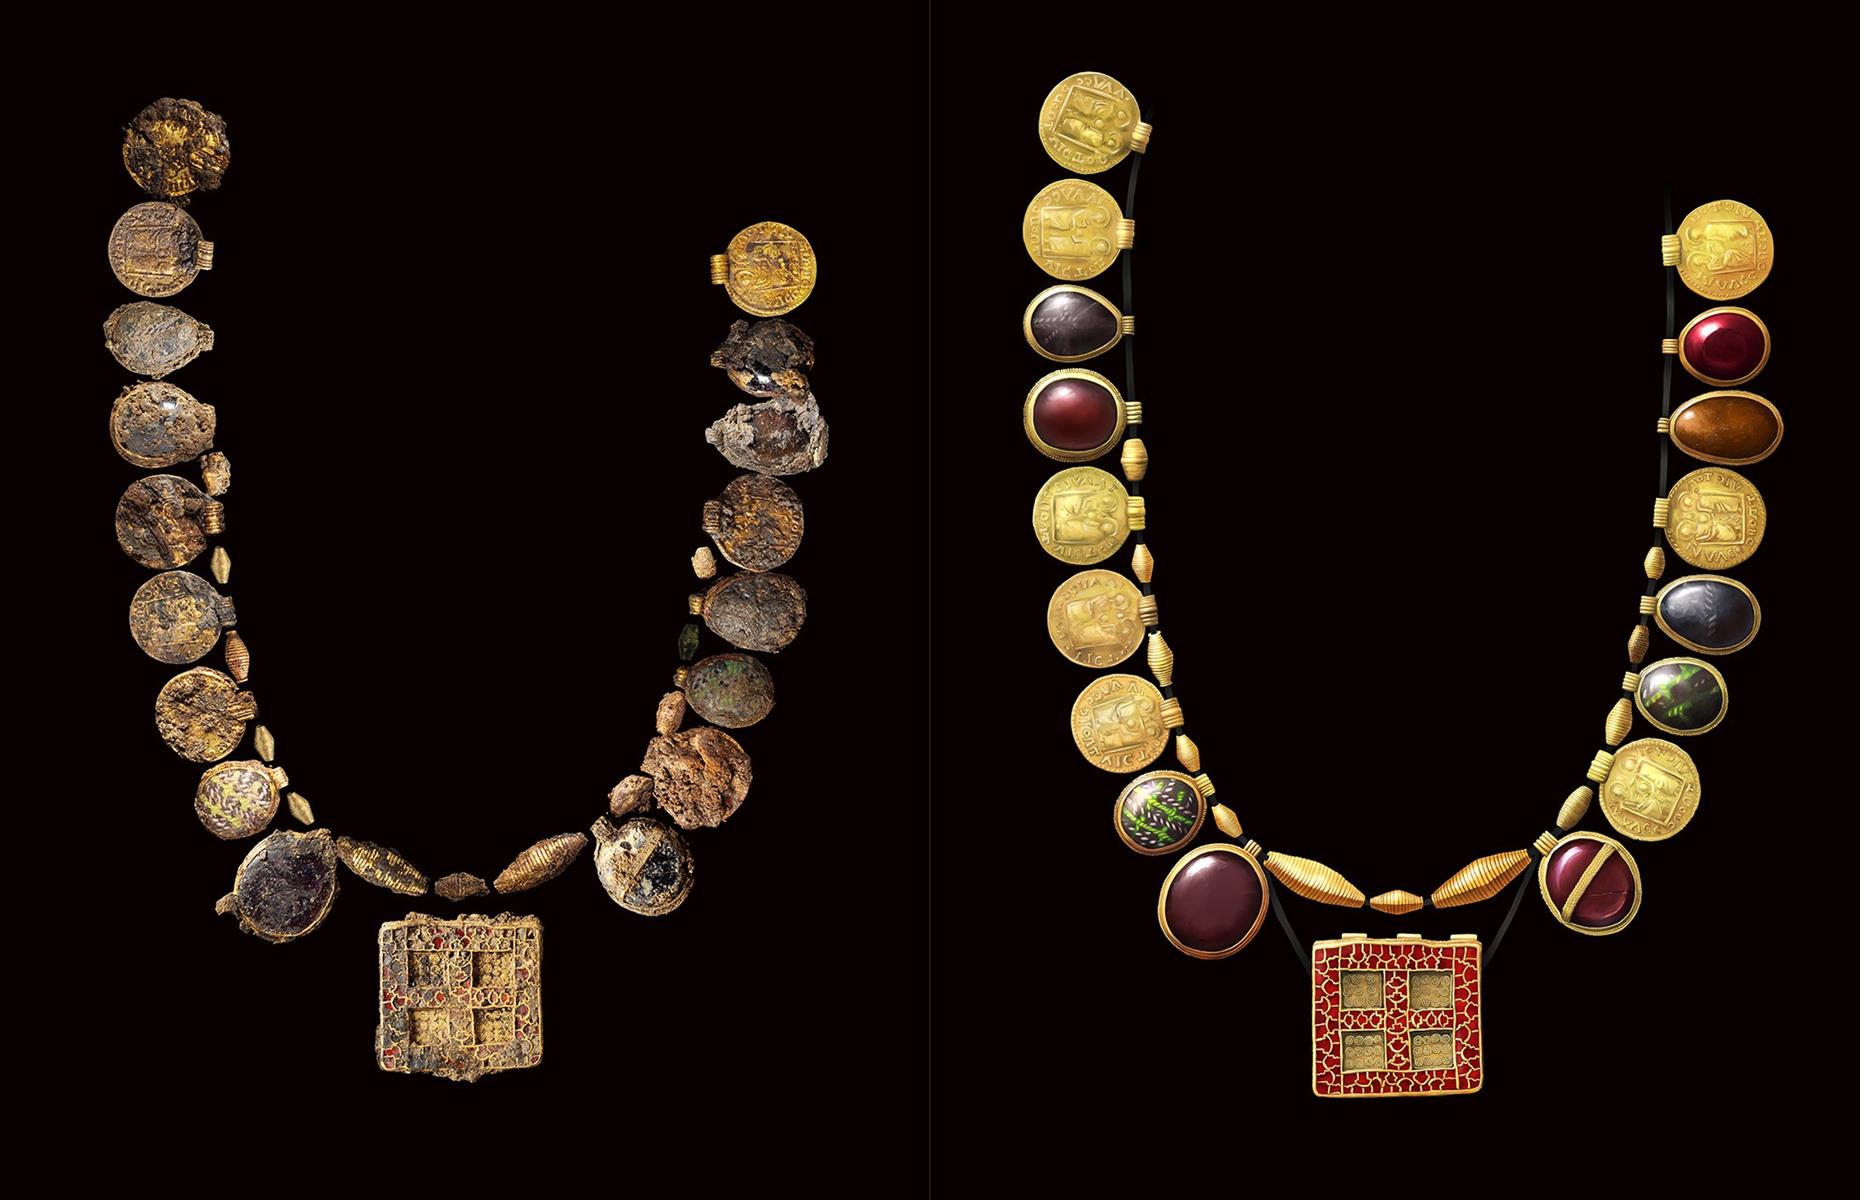 <p>Archaeologists in the UK have uncovered a "once-in-a-lifetime" find – a grand medieval necklace adorned with Roman coins, gold, garnets and semi-precious stones, with an intricate rectangular cross as its centrepiece. A burial item, likely draped around the neck of a devout, high-status woman (an abbess perhaps, or a minor royal), the ornament was plucked from the ground in the village of Harpole ahead of a proposed housing development, where it had lain for more than 1,350 years. Already nicknamed 'the Harpole Treasure', the necklace is much more extravagant than any other find of its kind, better-made and better-preserved than the Saxon necklaces found in the British Museum.</p>